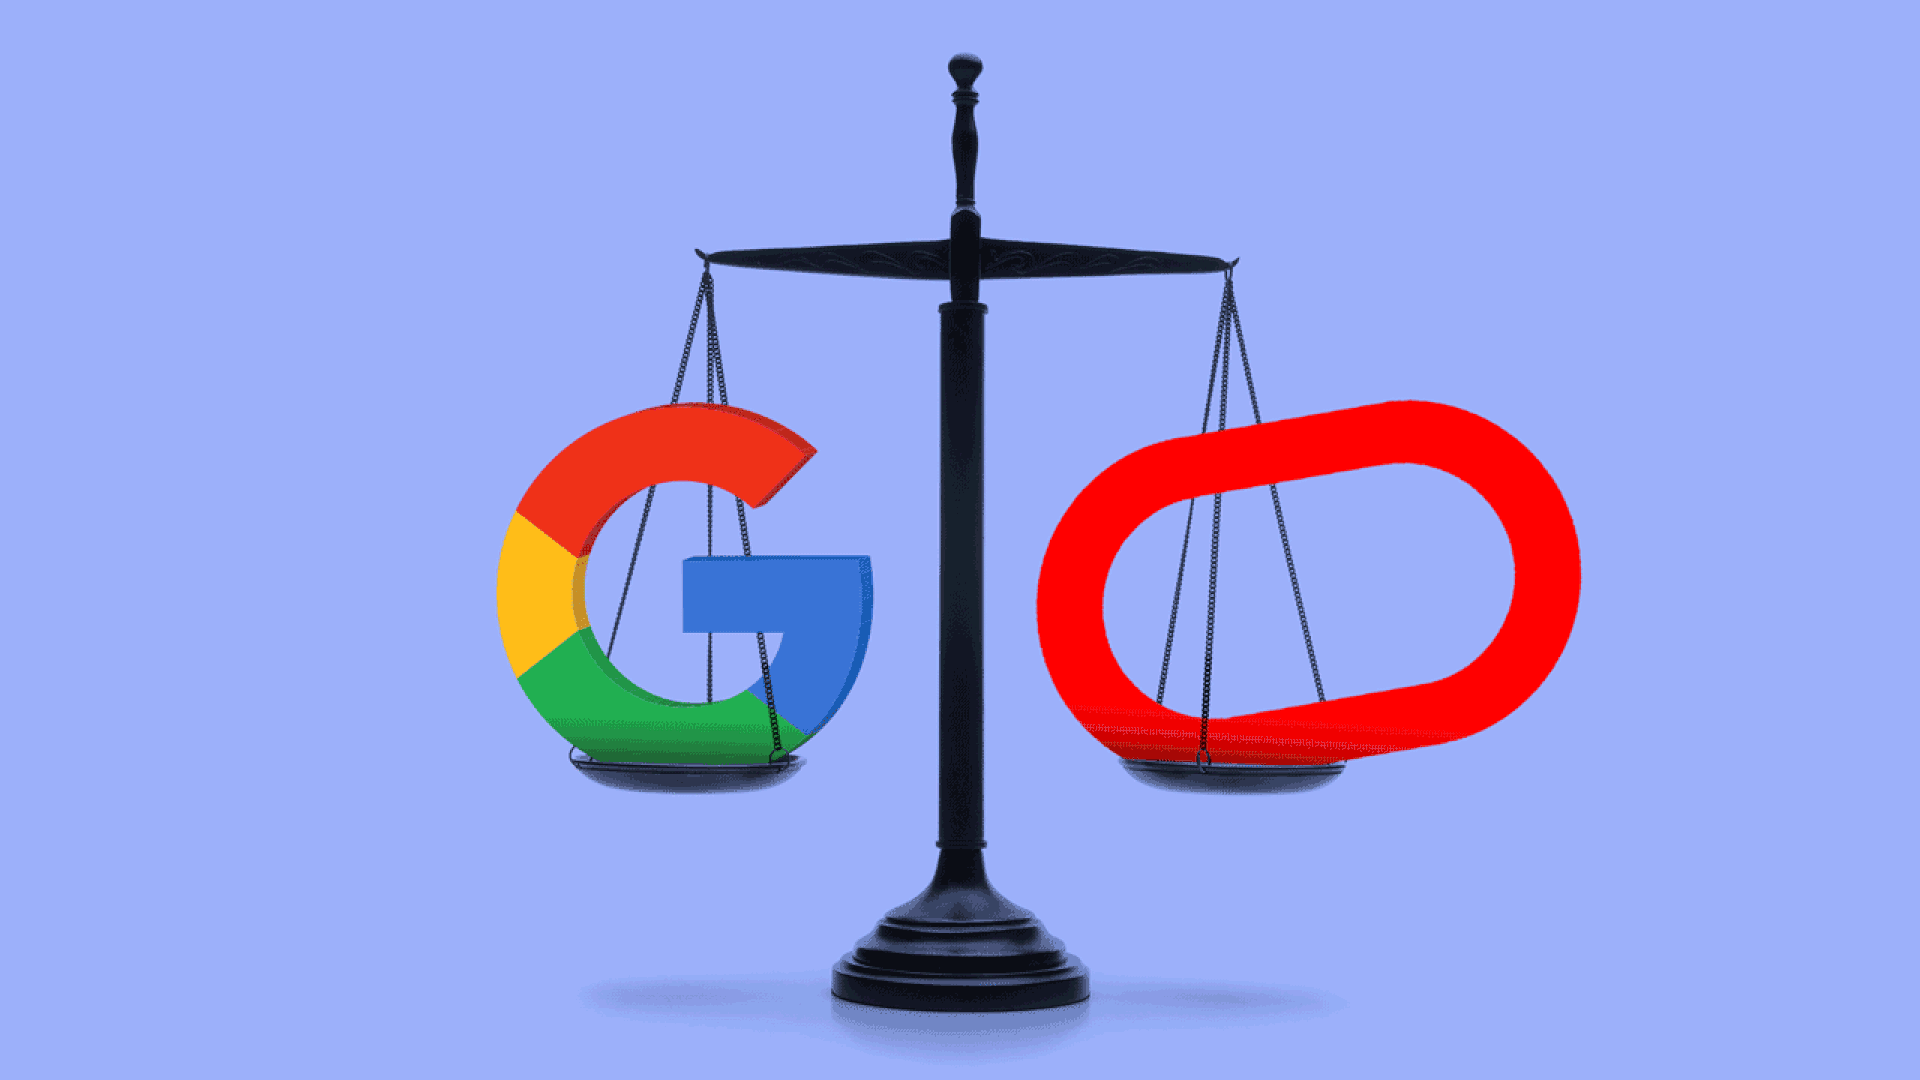 Animated illustration of a justice scale weighing the Google and Oracle logos